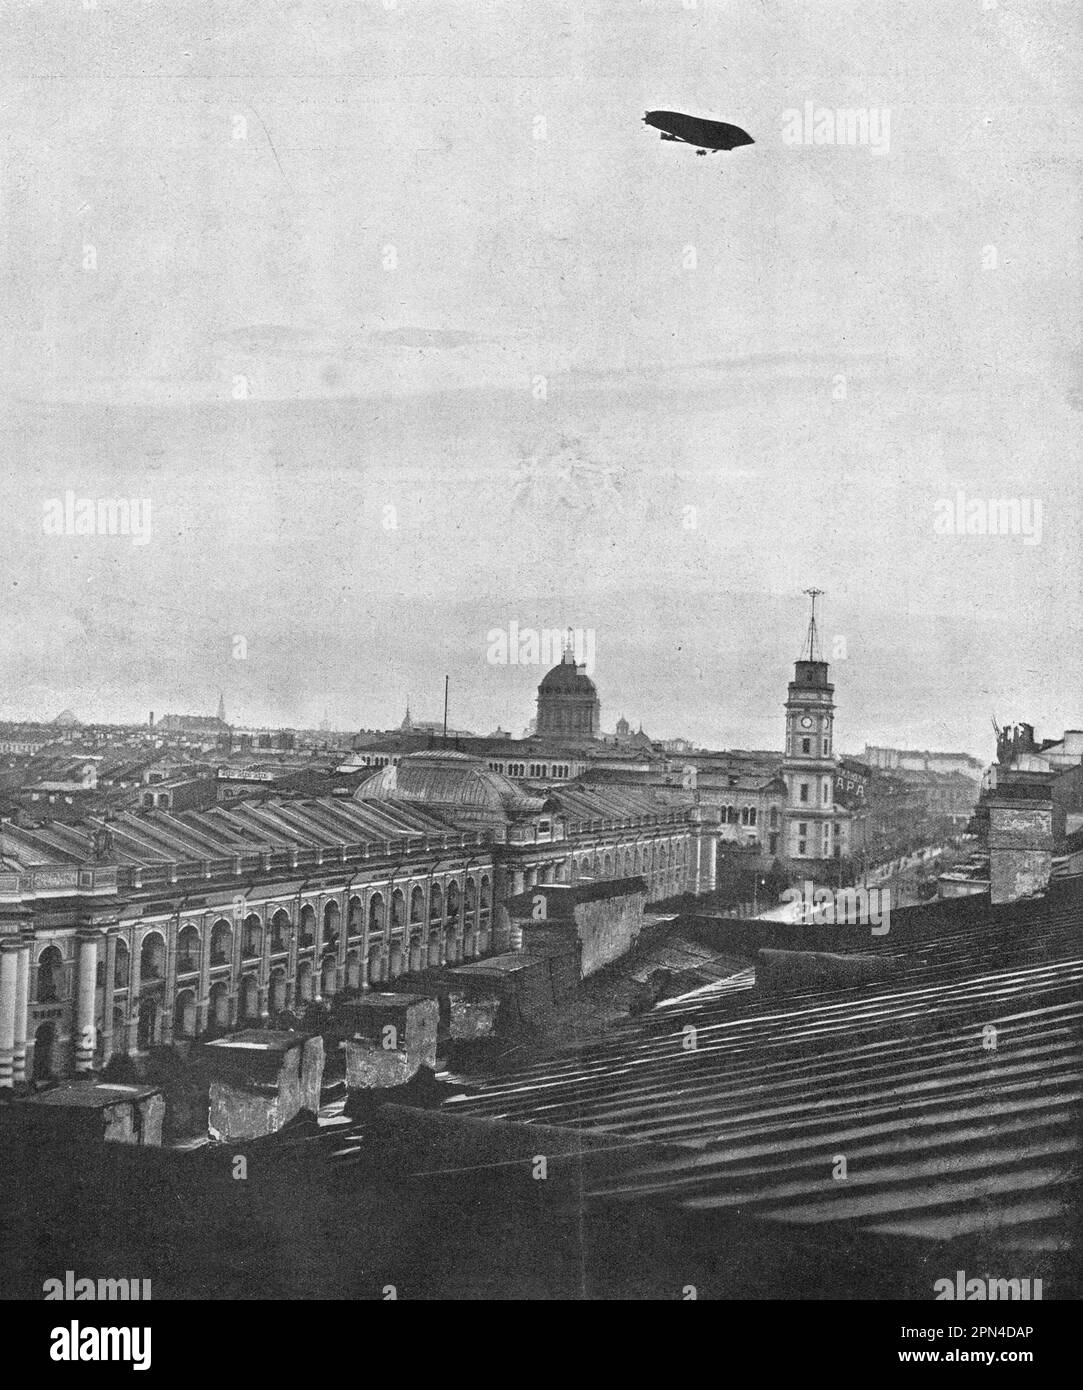 Flight of the airship 'Lebed' ('Swan') over St. Petersburg. Photo from 1910. Stock Photo